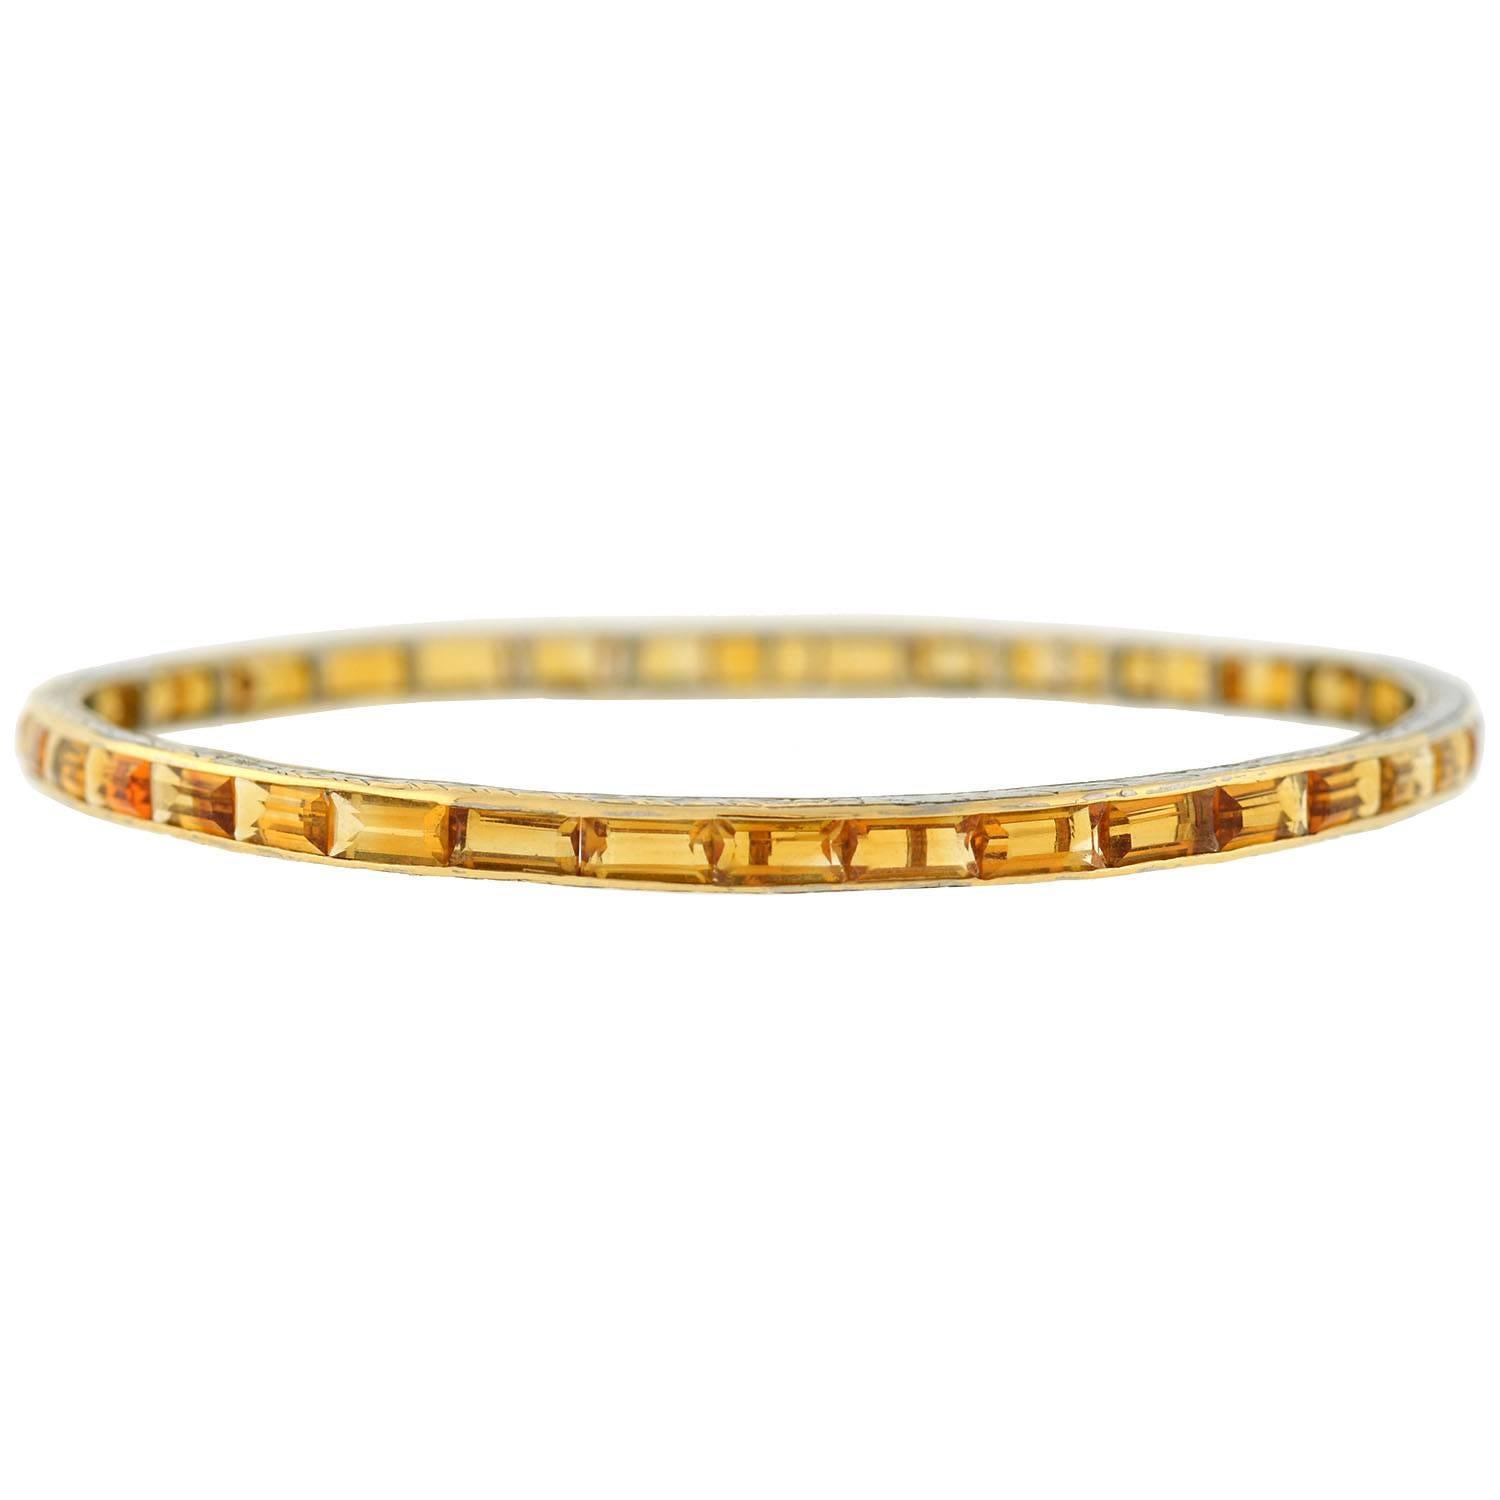 A beautiful citrine bracelet from the Art Deco (ca1920) era! This fabulous bangle bracelet is made of platinum-topped 14kt yellow gold, and is comprised of 38 channel set citrine stones. The rectangular step cut stones display a gorgeous rich golden